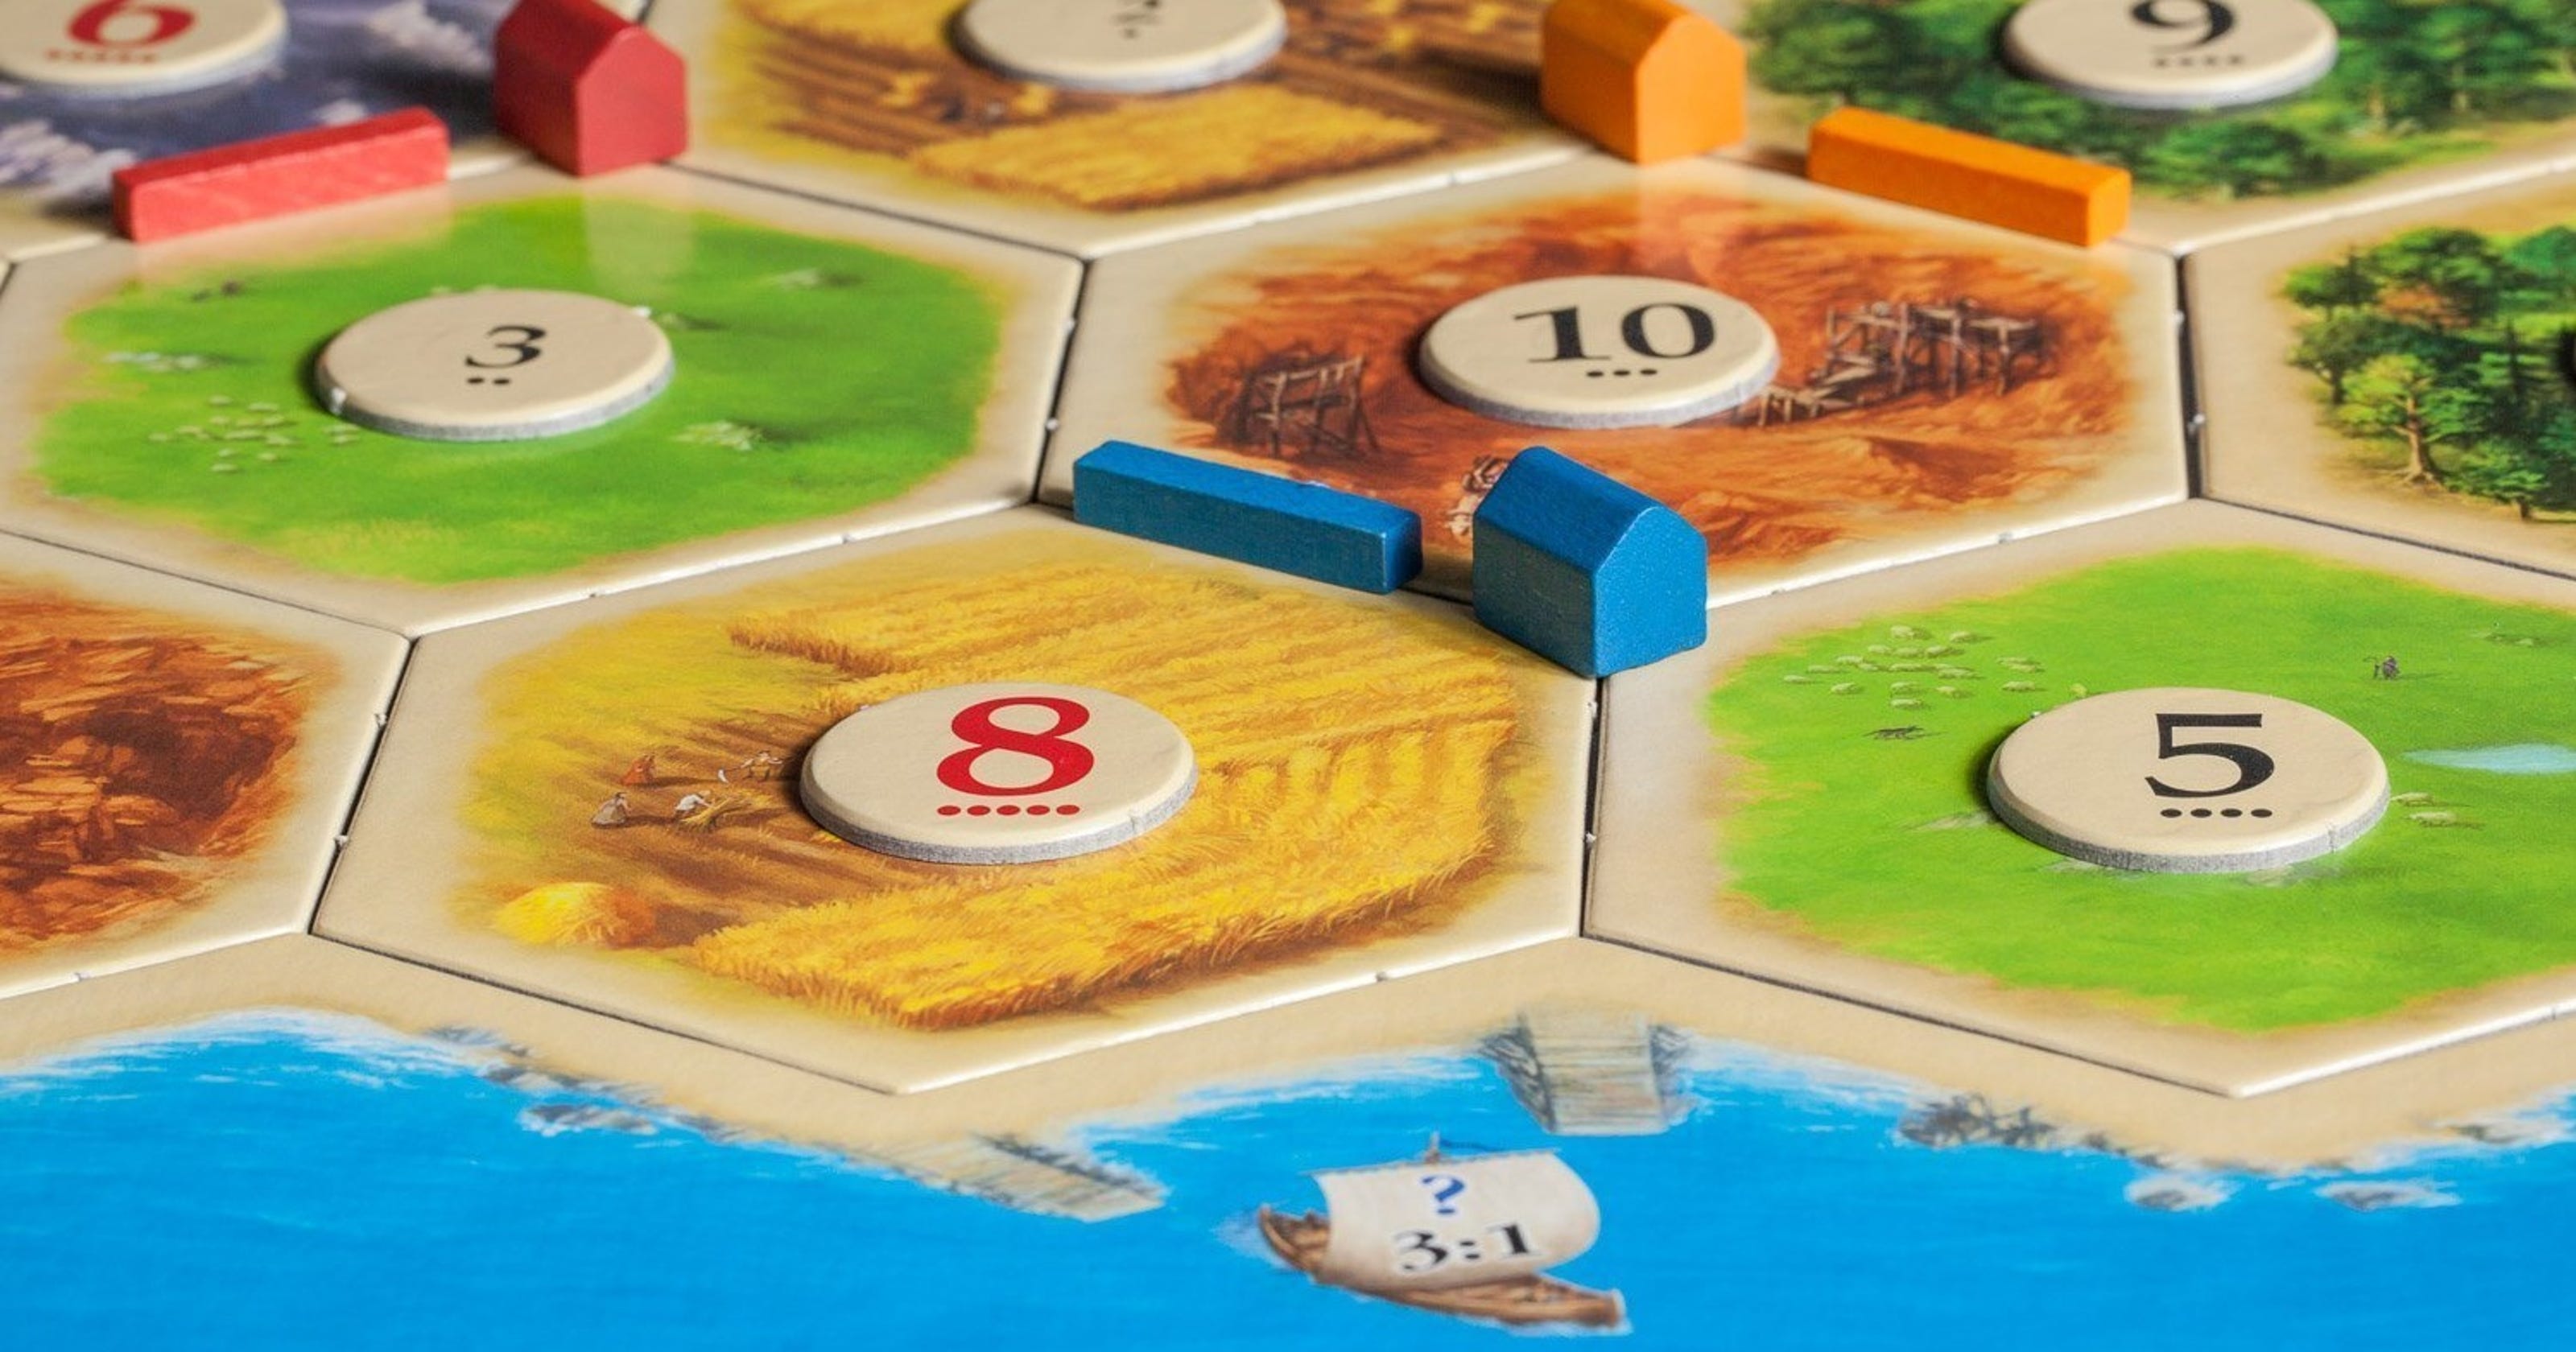 14-of-the-most-popular-board-games-on-amazon-this-summer